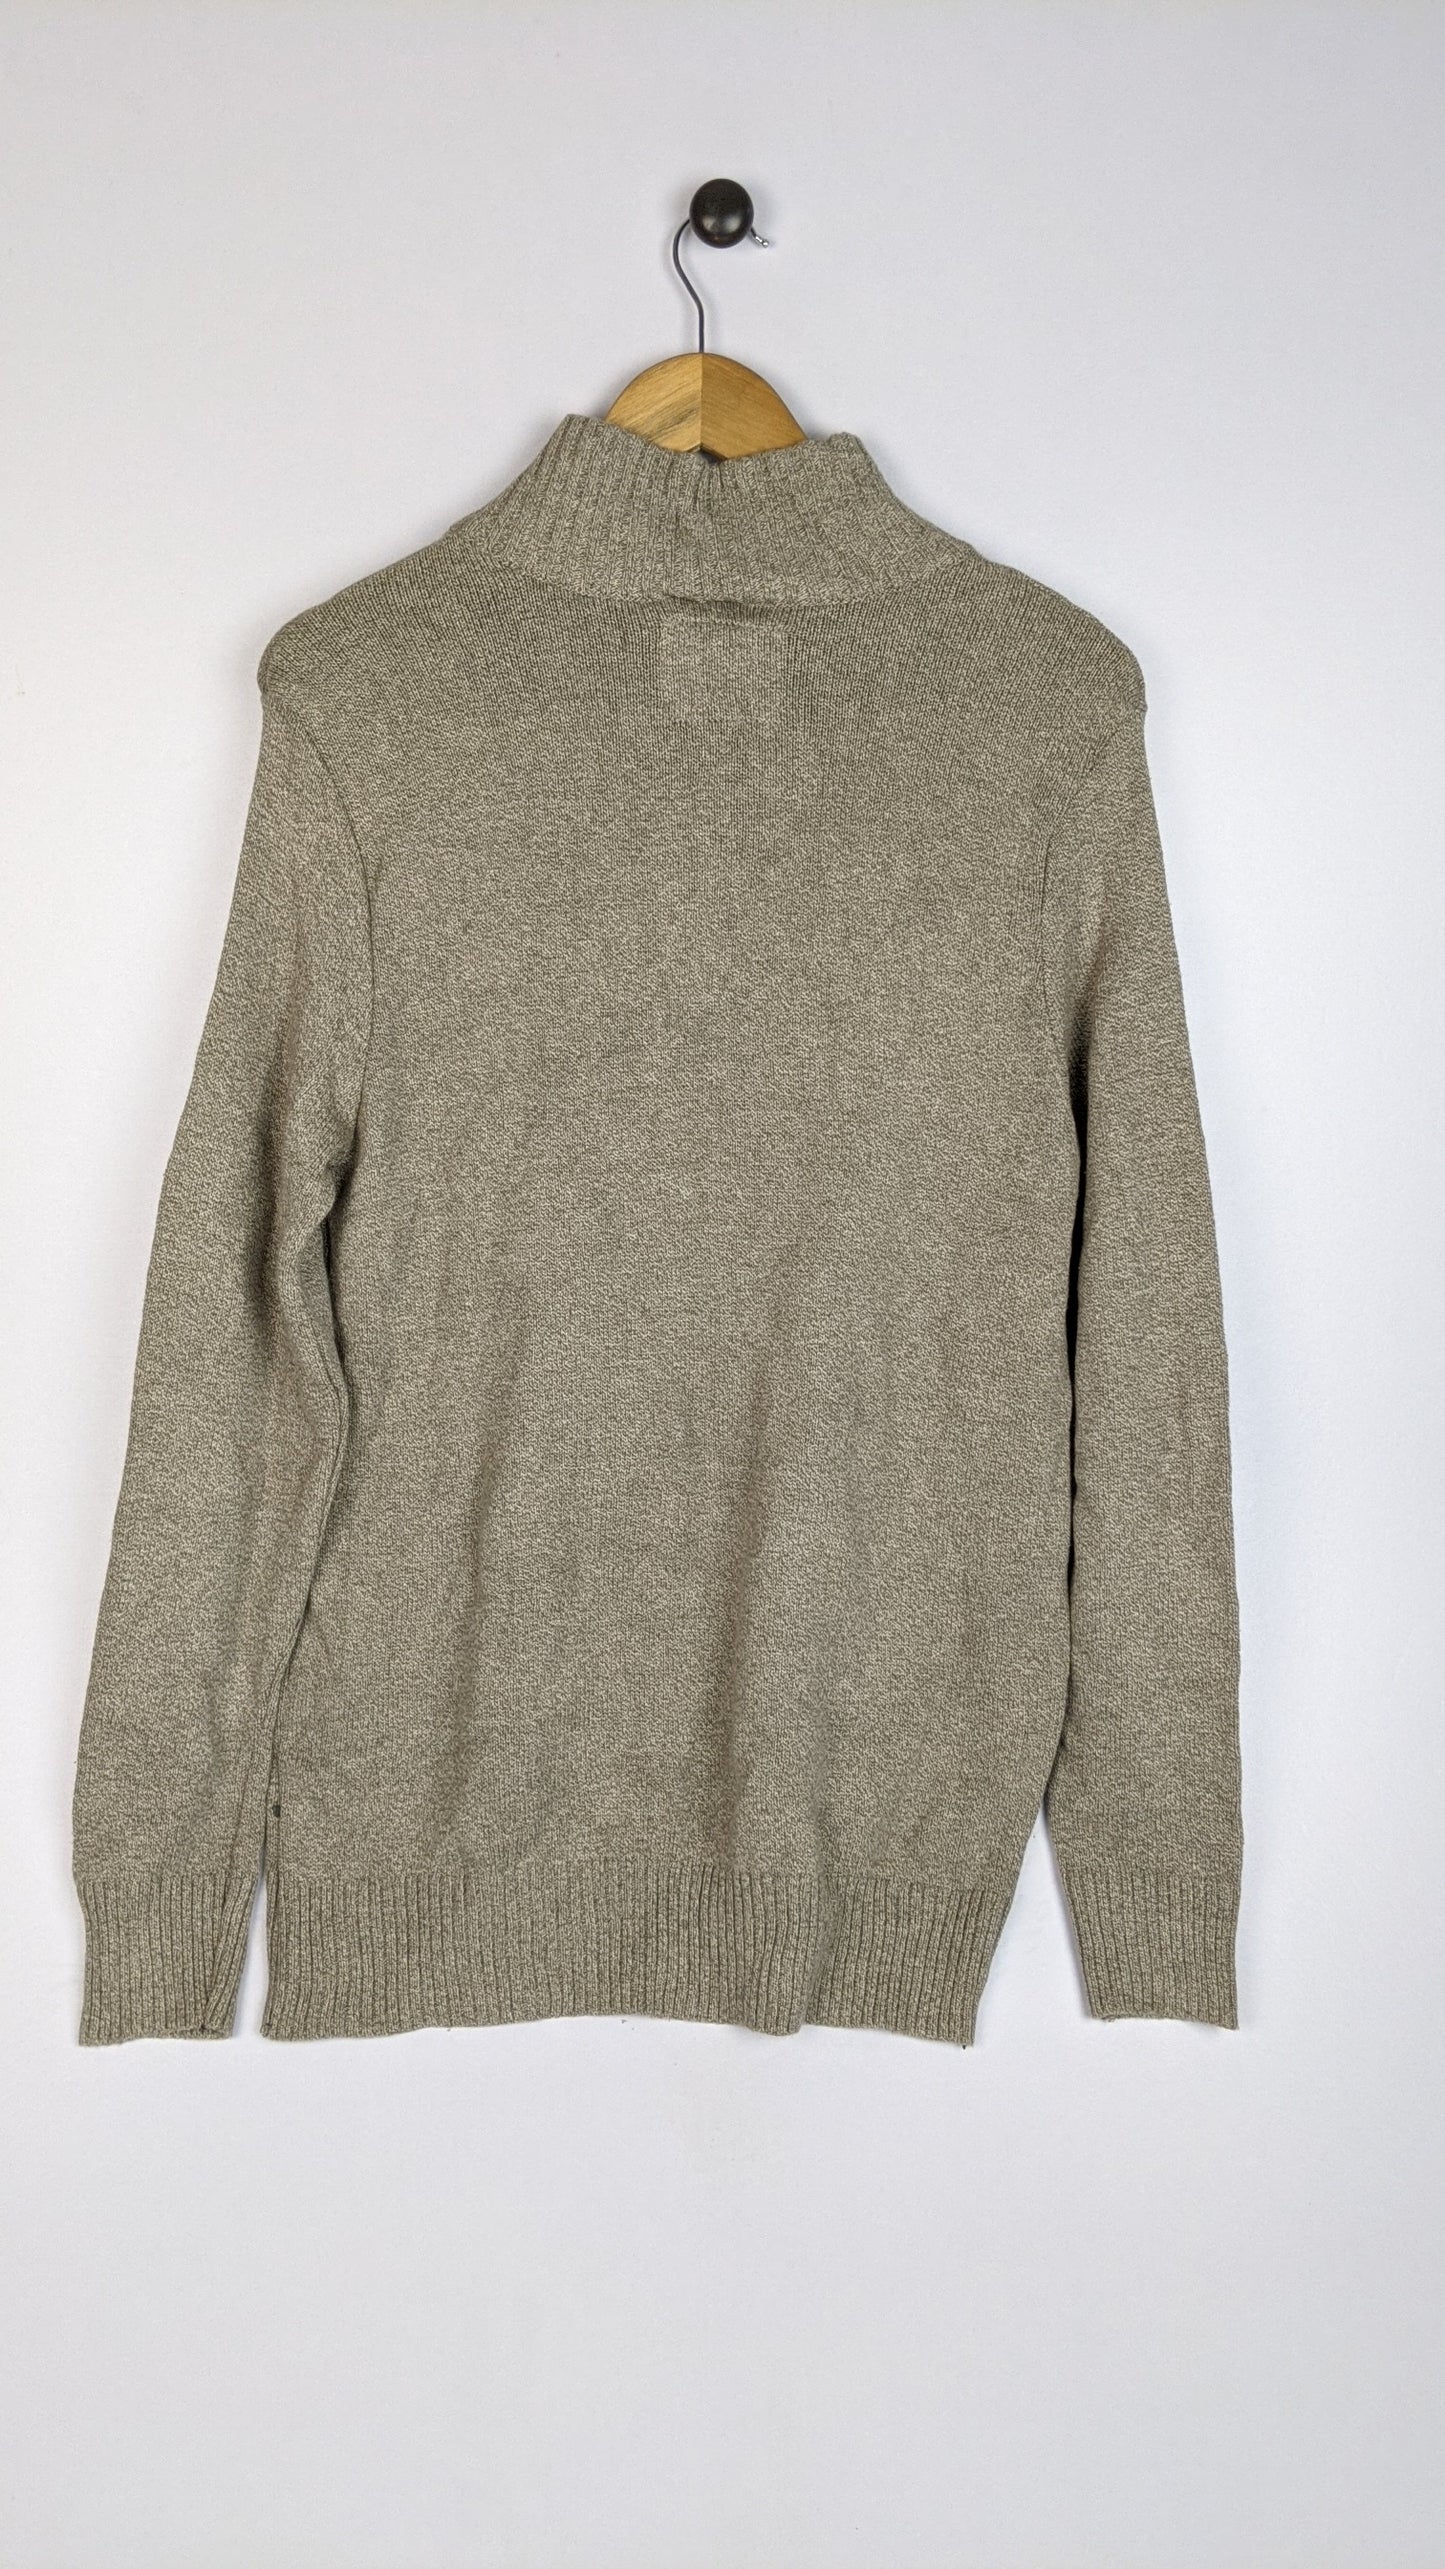 American Eagles Outfitters Coffee Hi-Neck Sweater